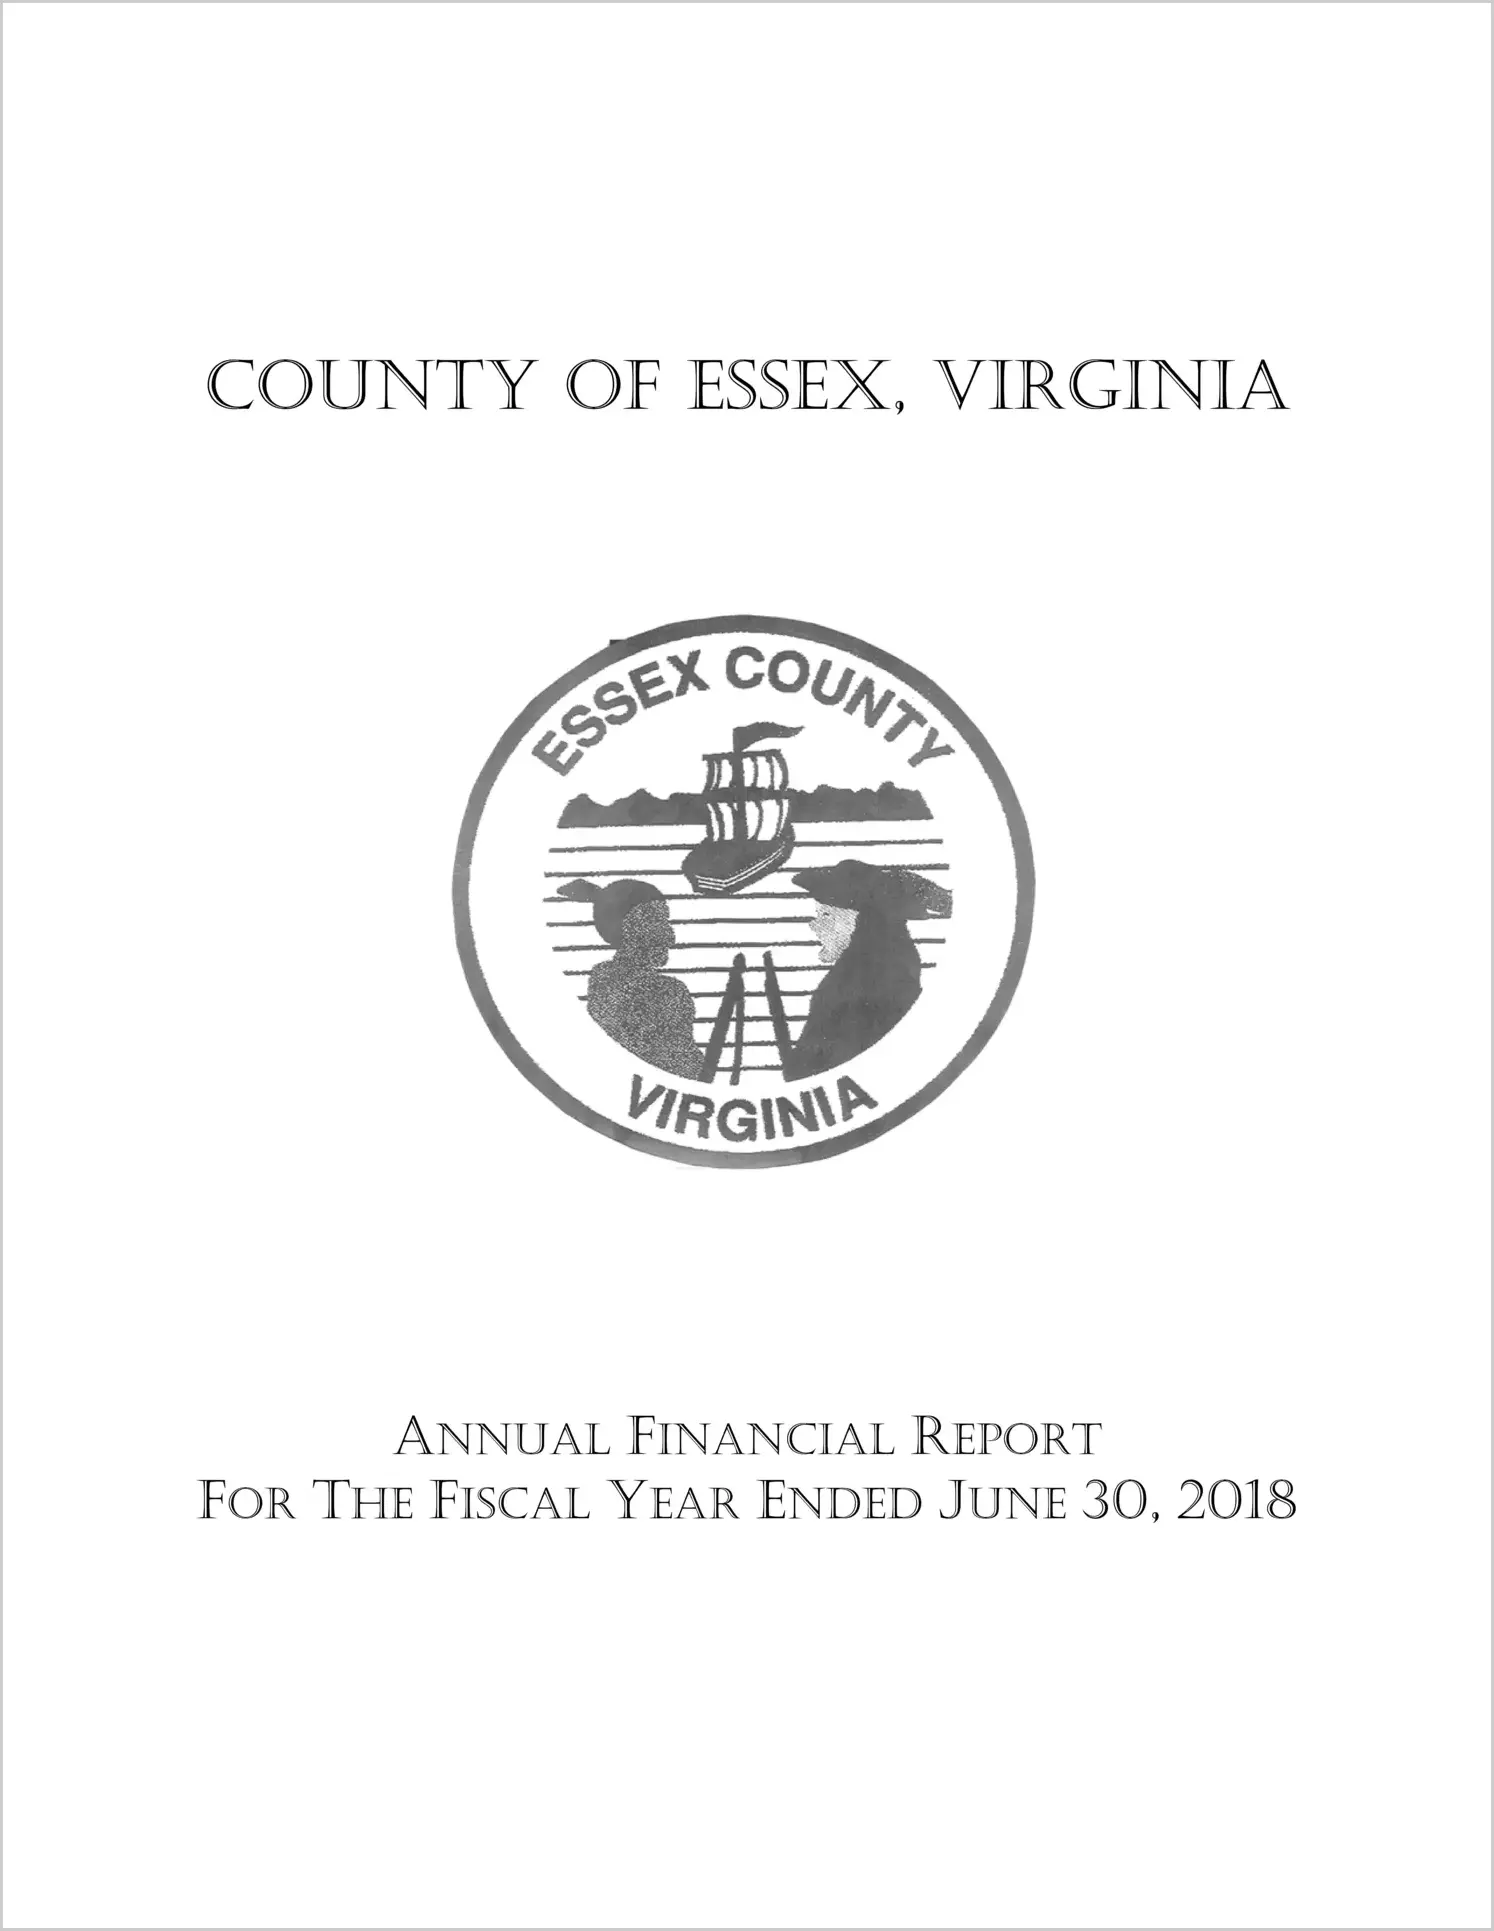 2018 Annual Financial Report for County of Essex